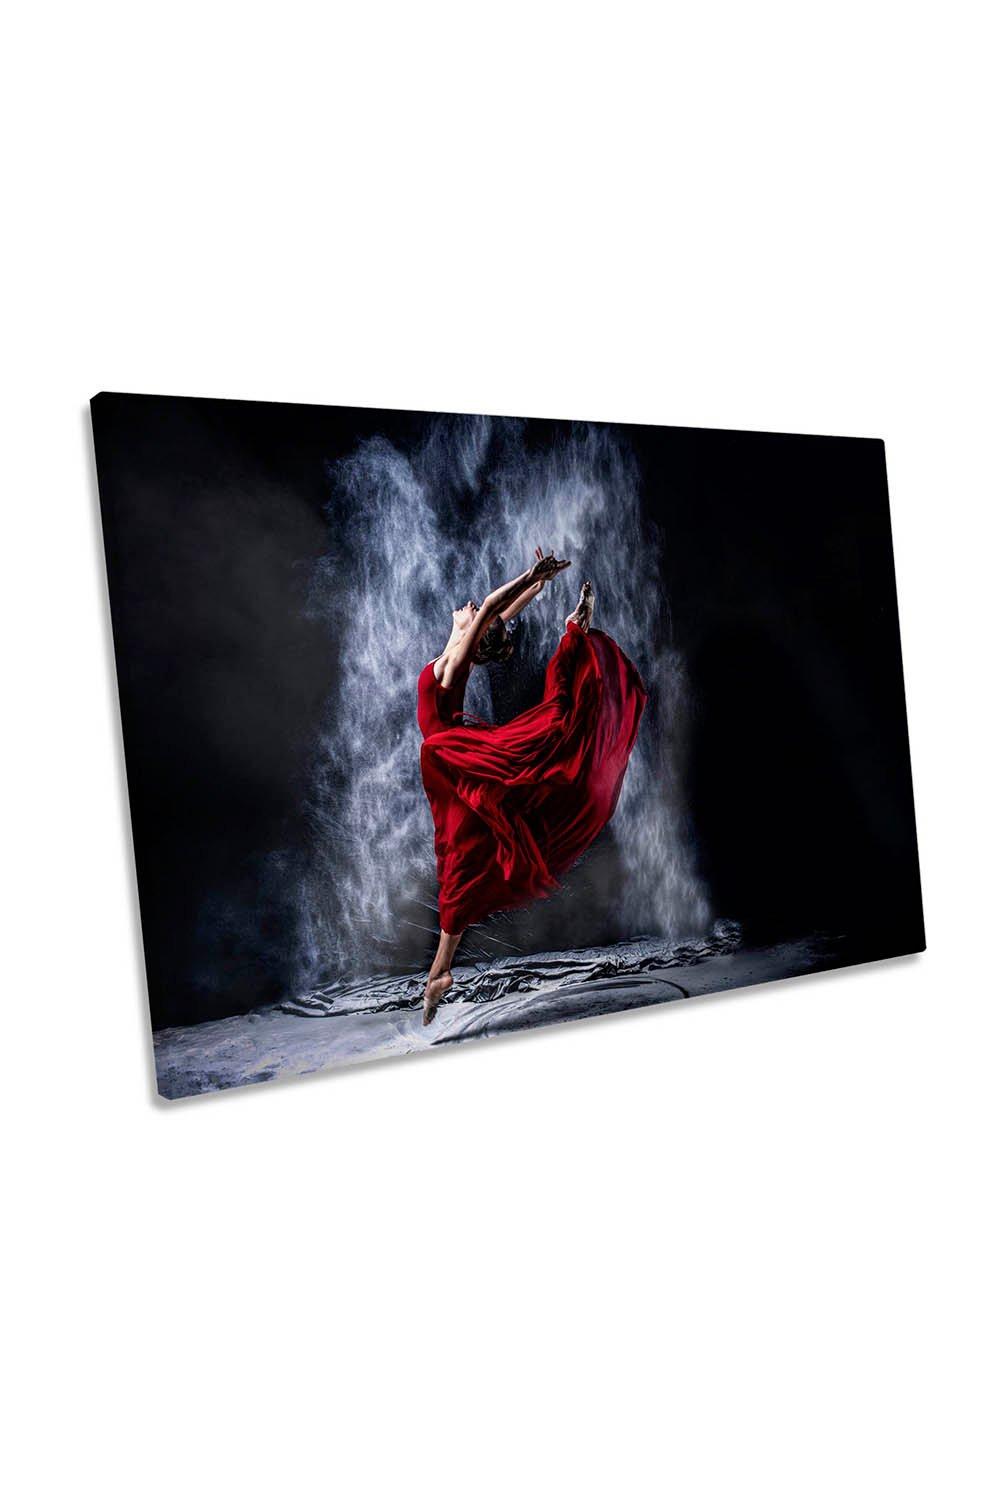 Red Dancing Ballet Fashion Dress Canvas Wall Art Picture Print